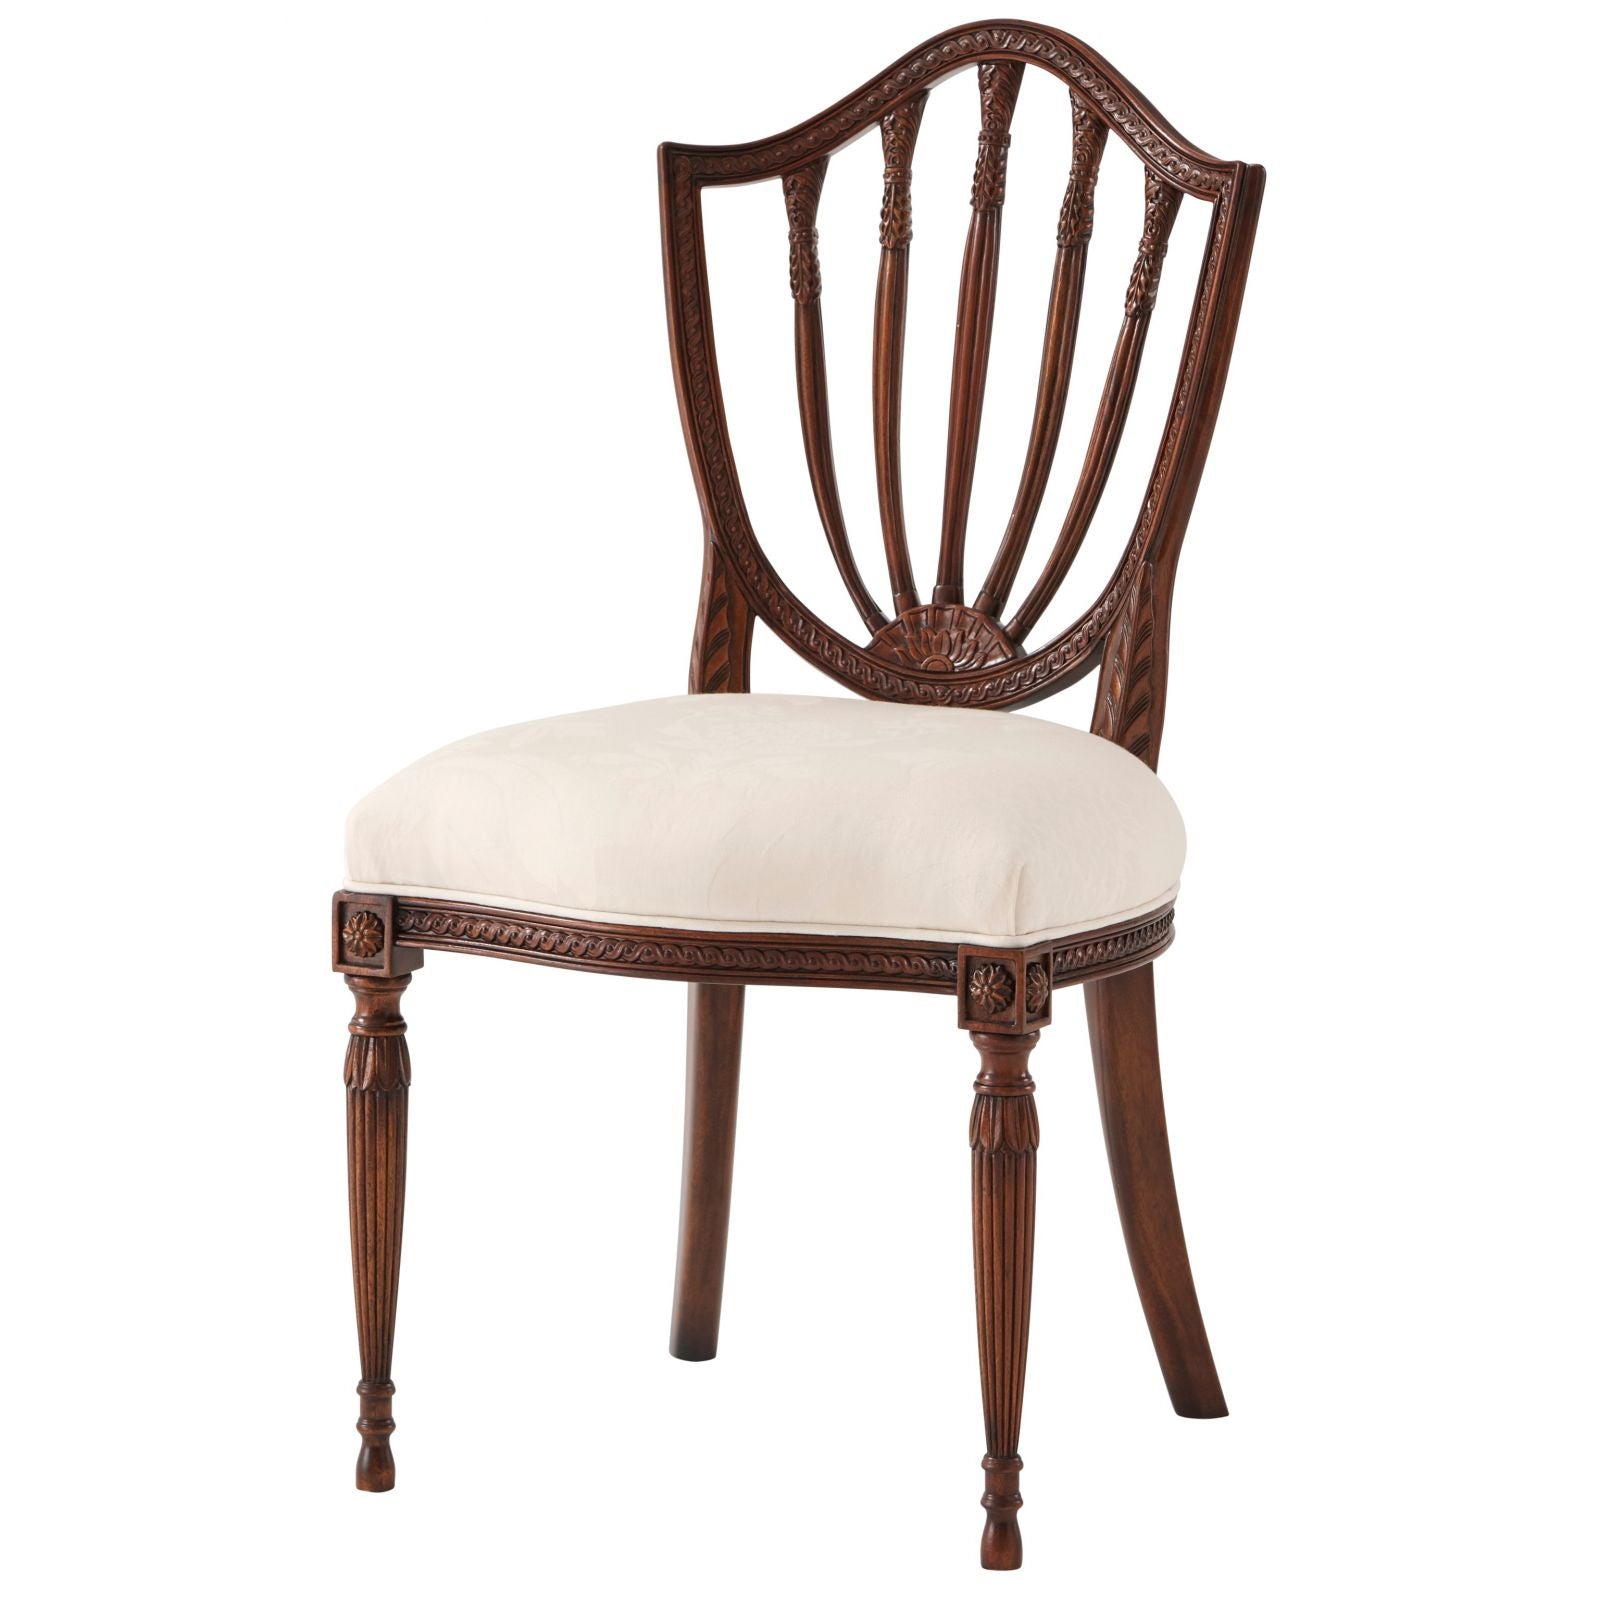 Hepplewhite style dining chair with Isle Mill Scottish wool seat fabric